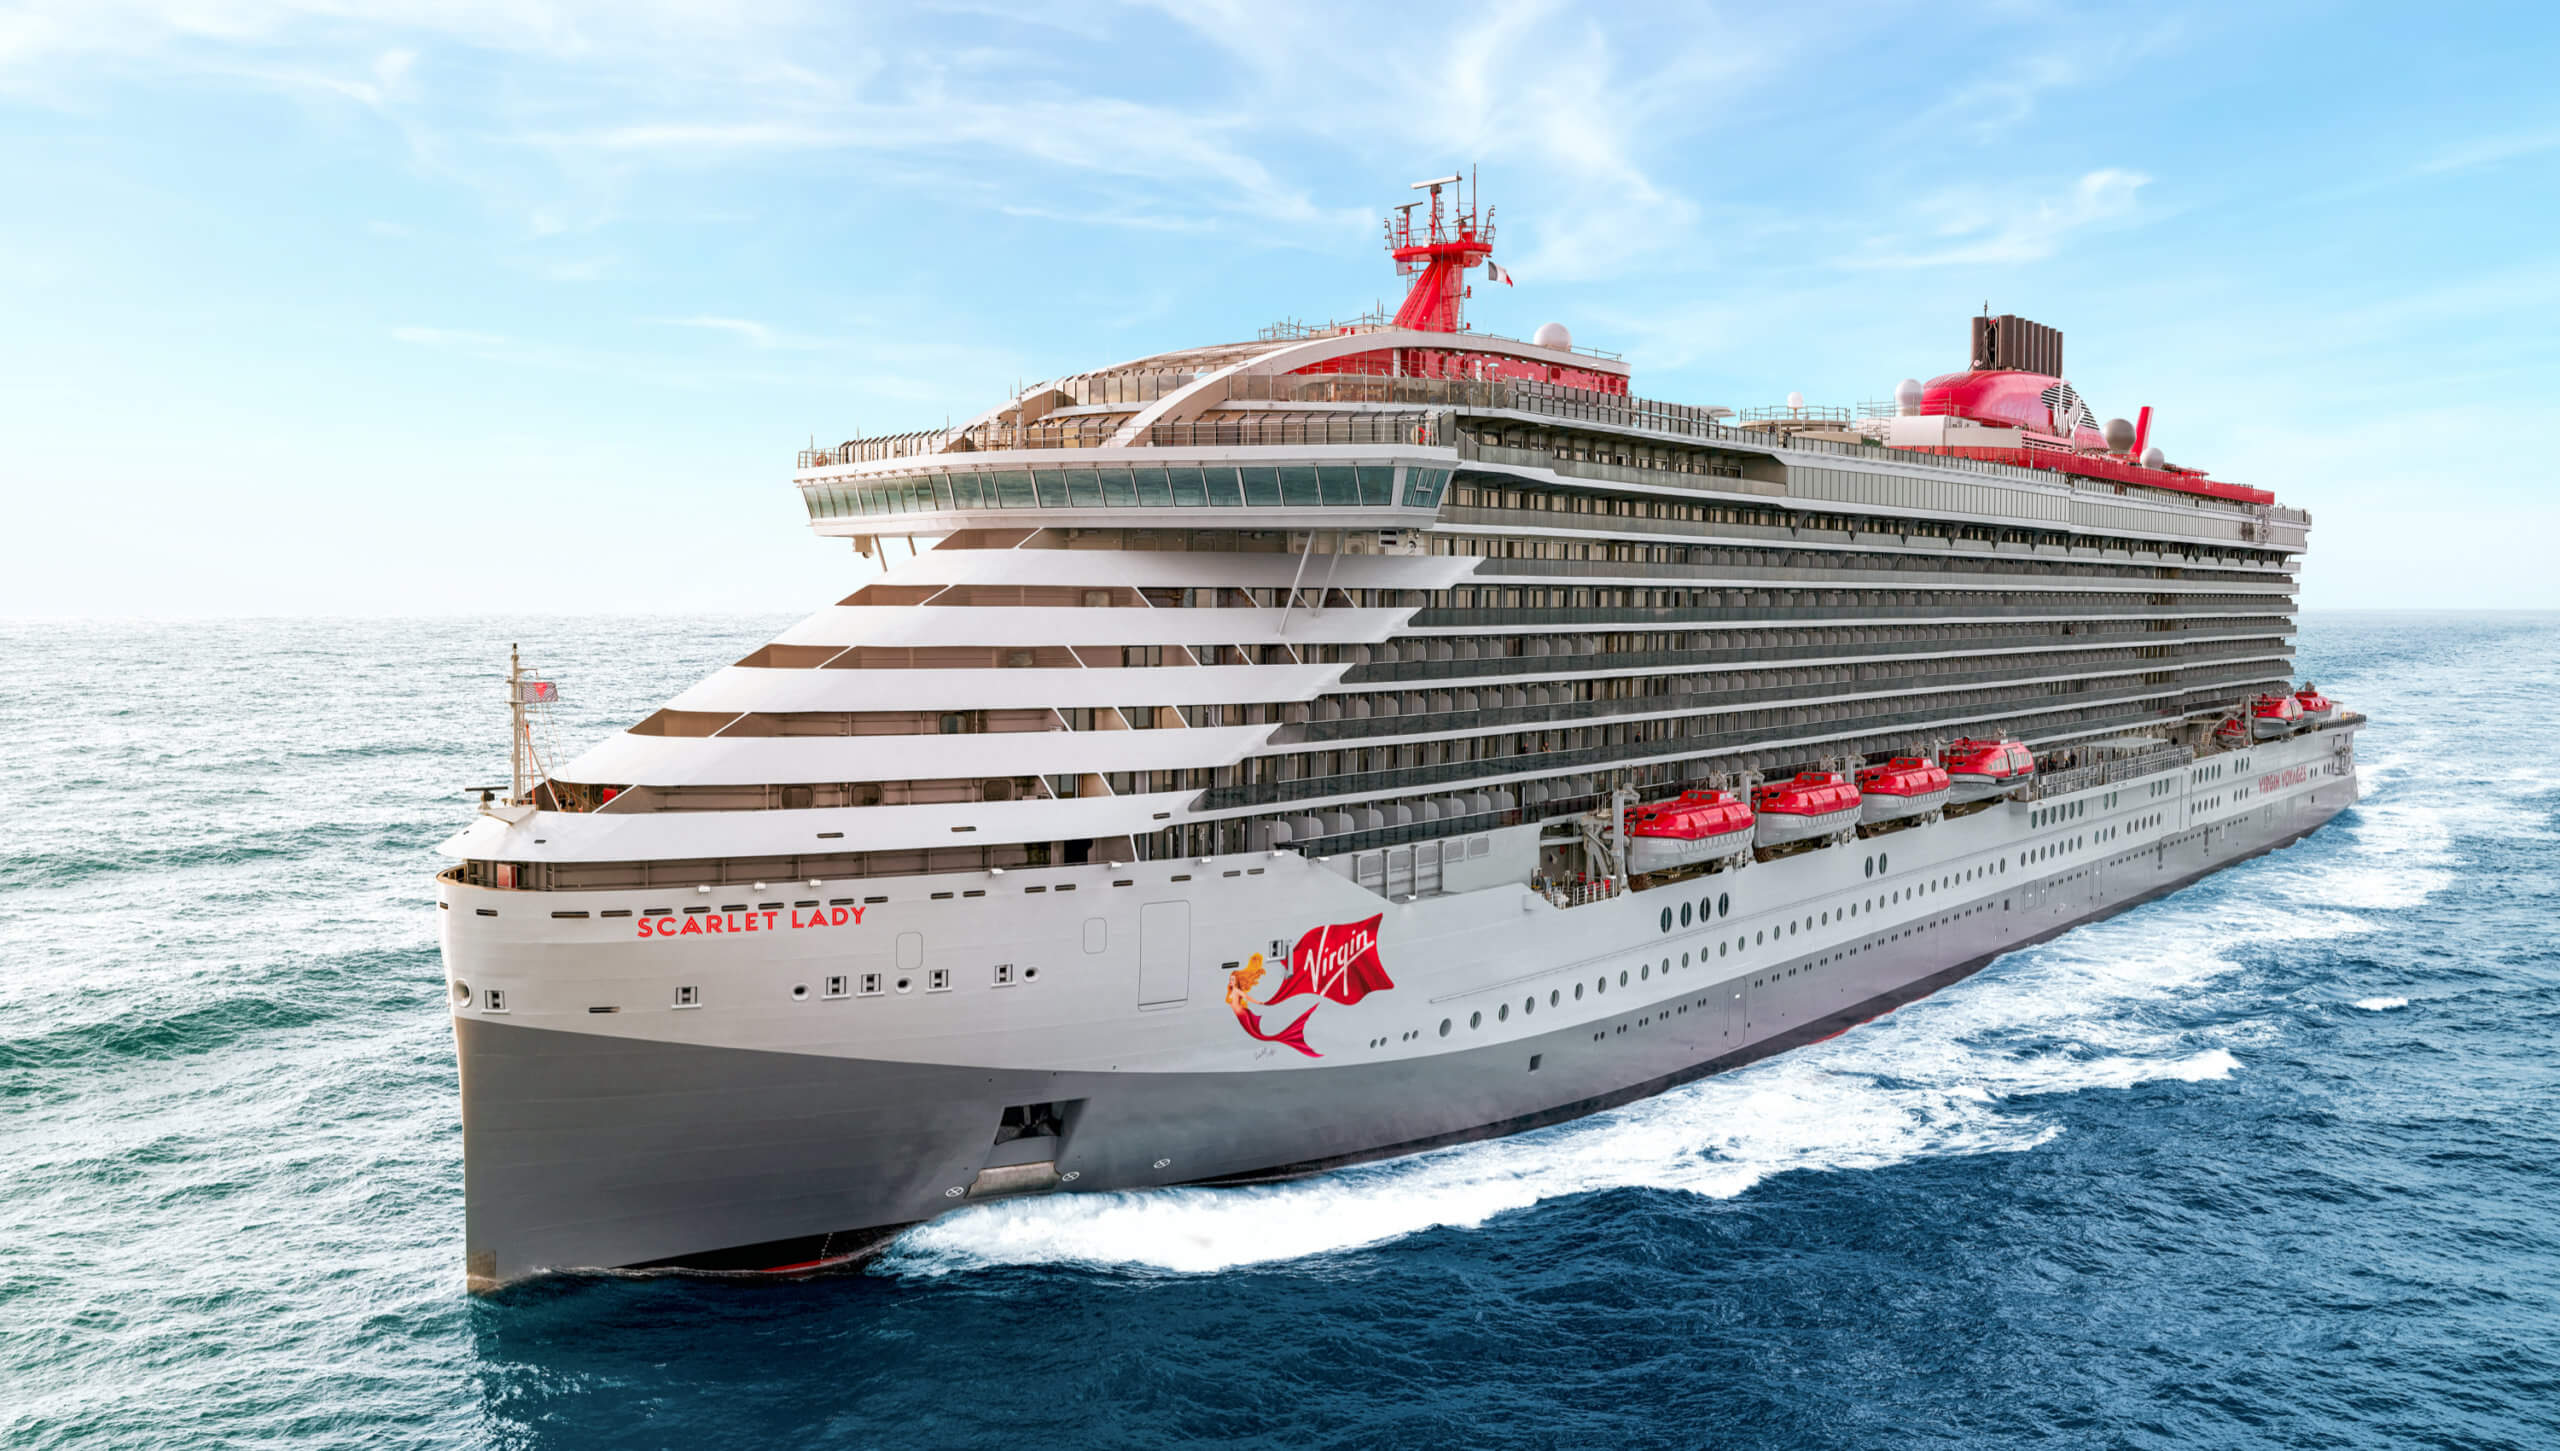 Win a cruise with Virgin Voyages from Cruise International